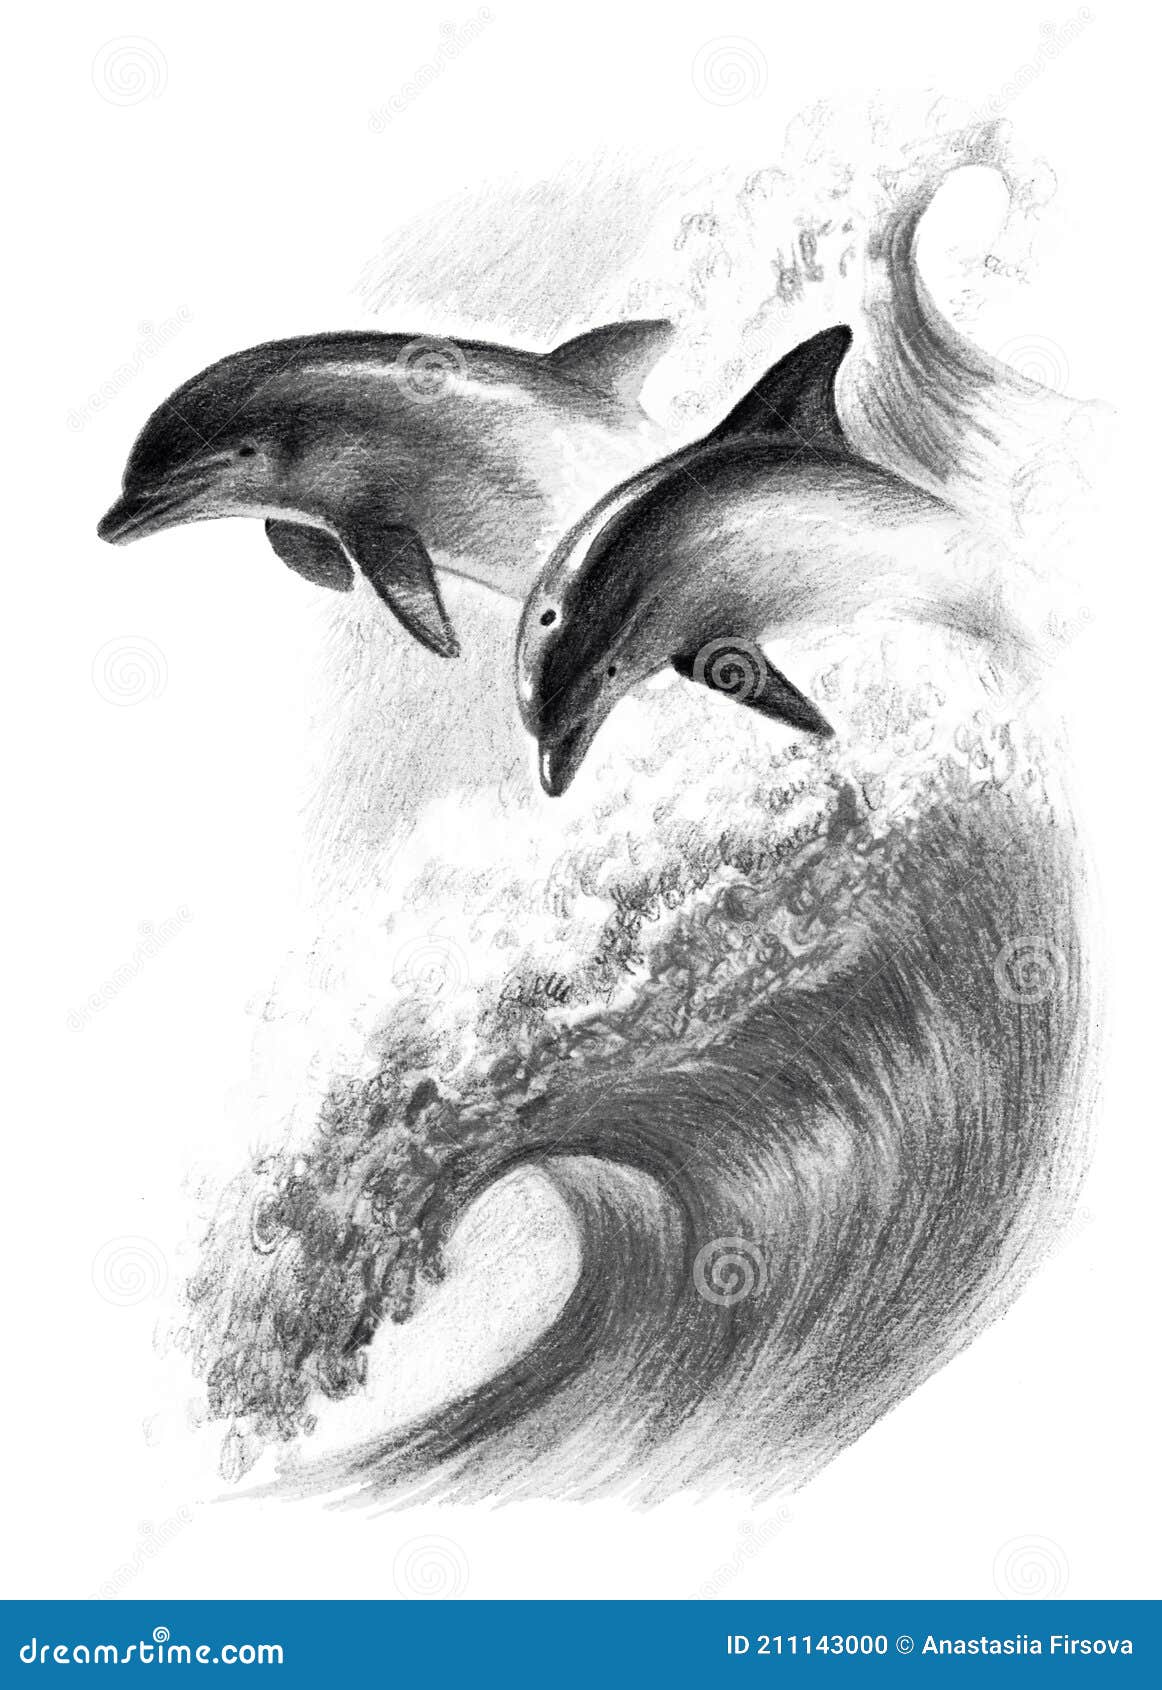 The baby dolphin Drawing by Deepanshu Pargain  Pixels